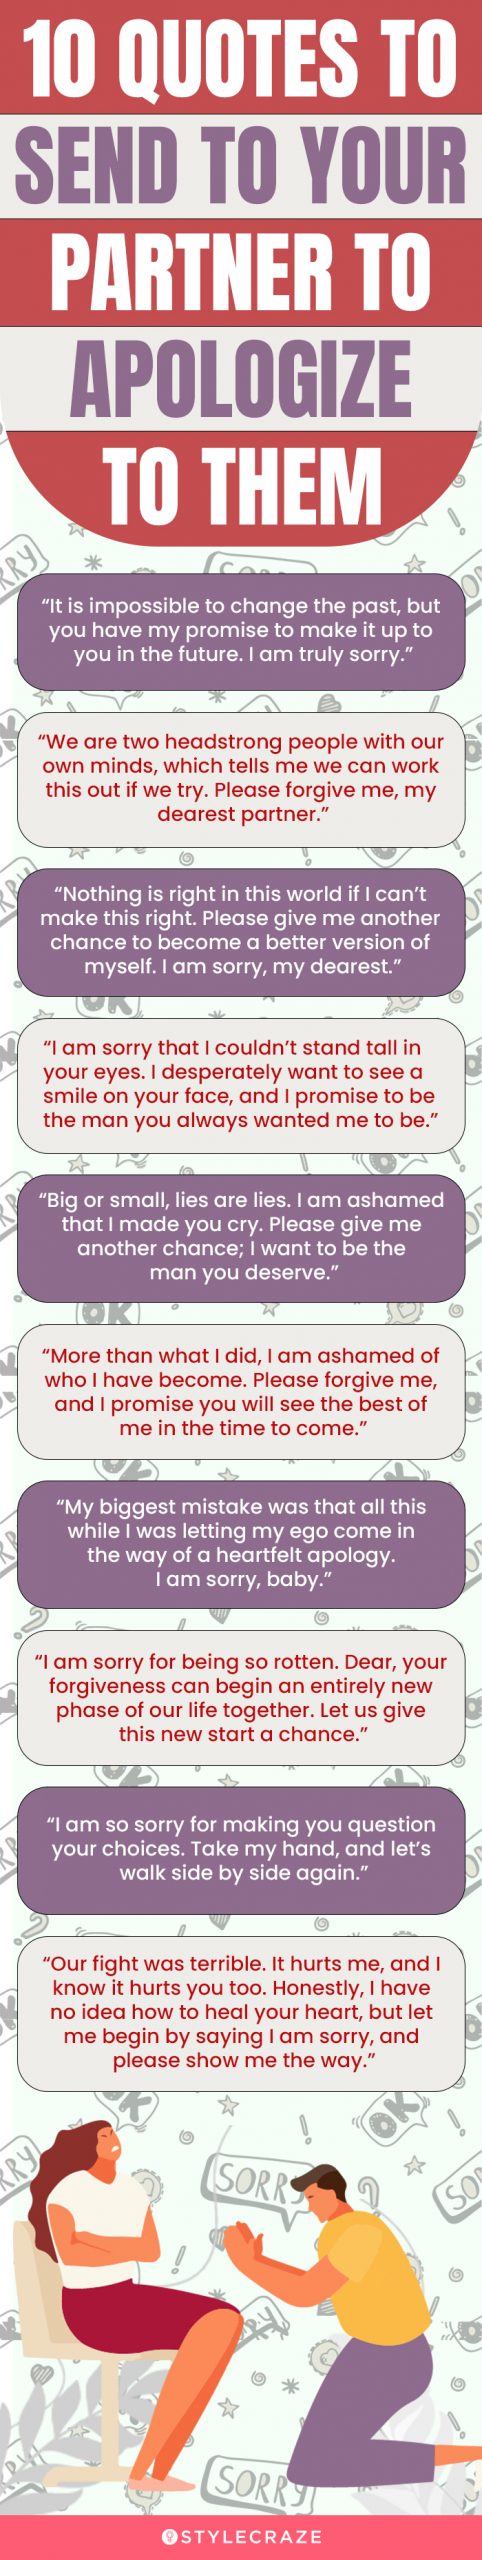 10 quotes to send to your partner to apologize to them (infographic)